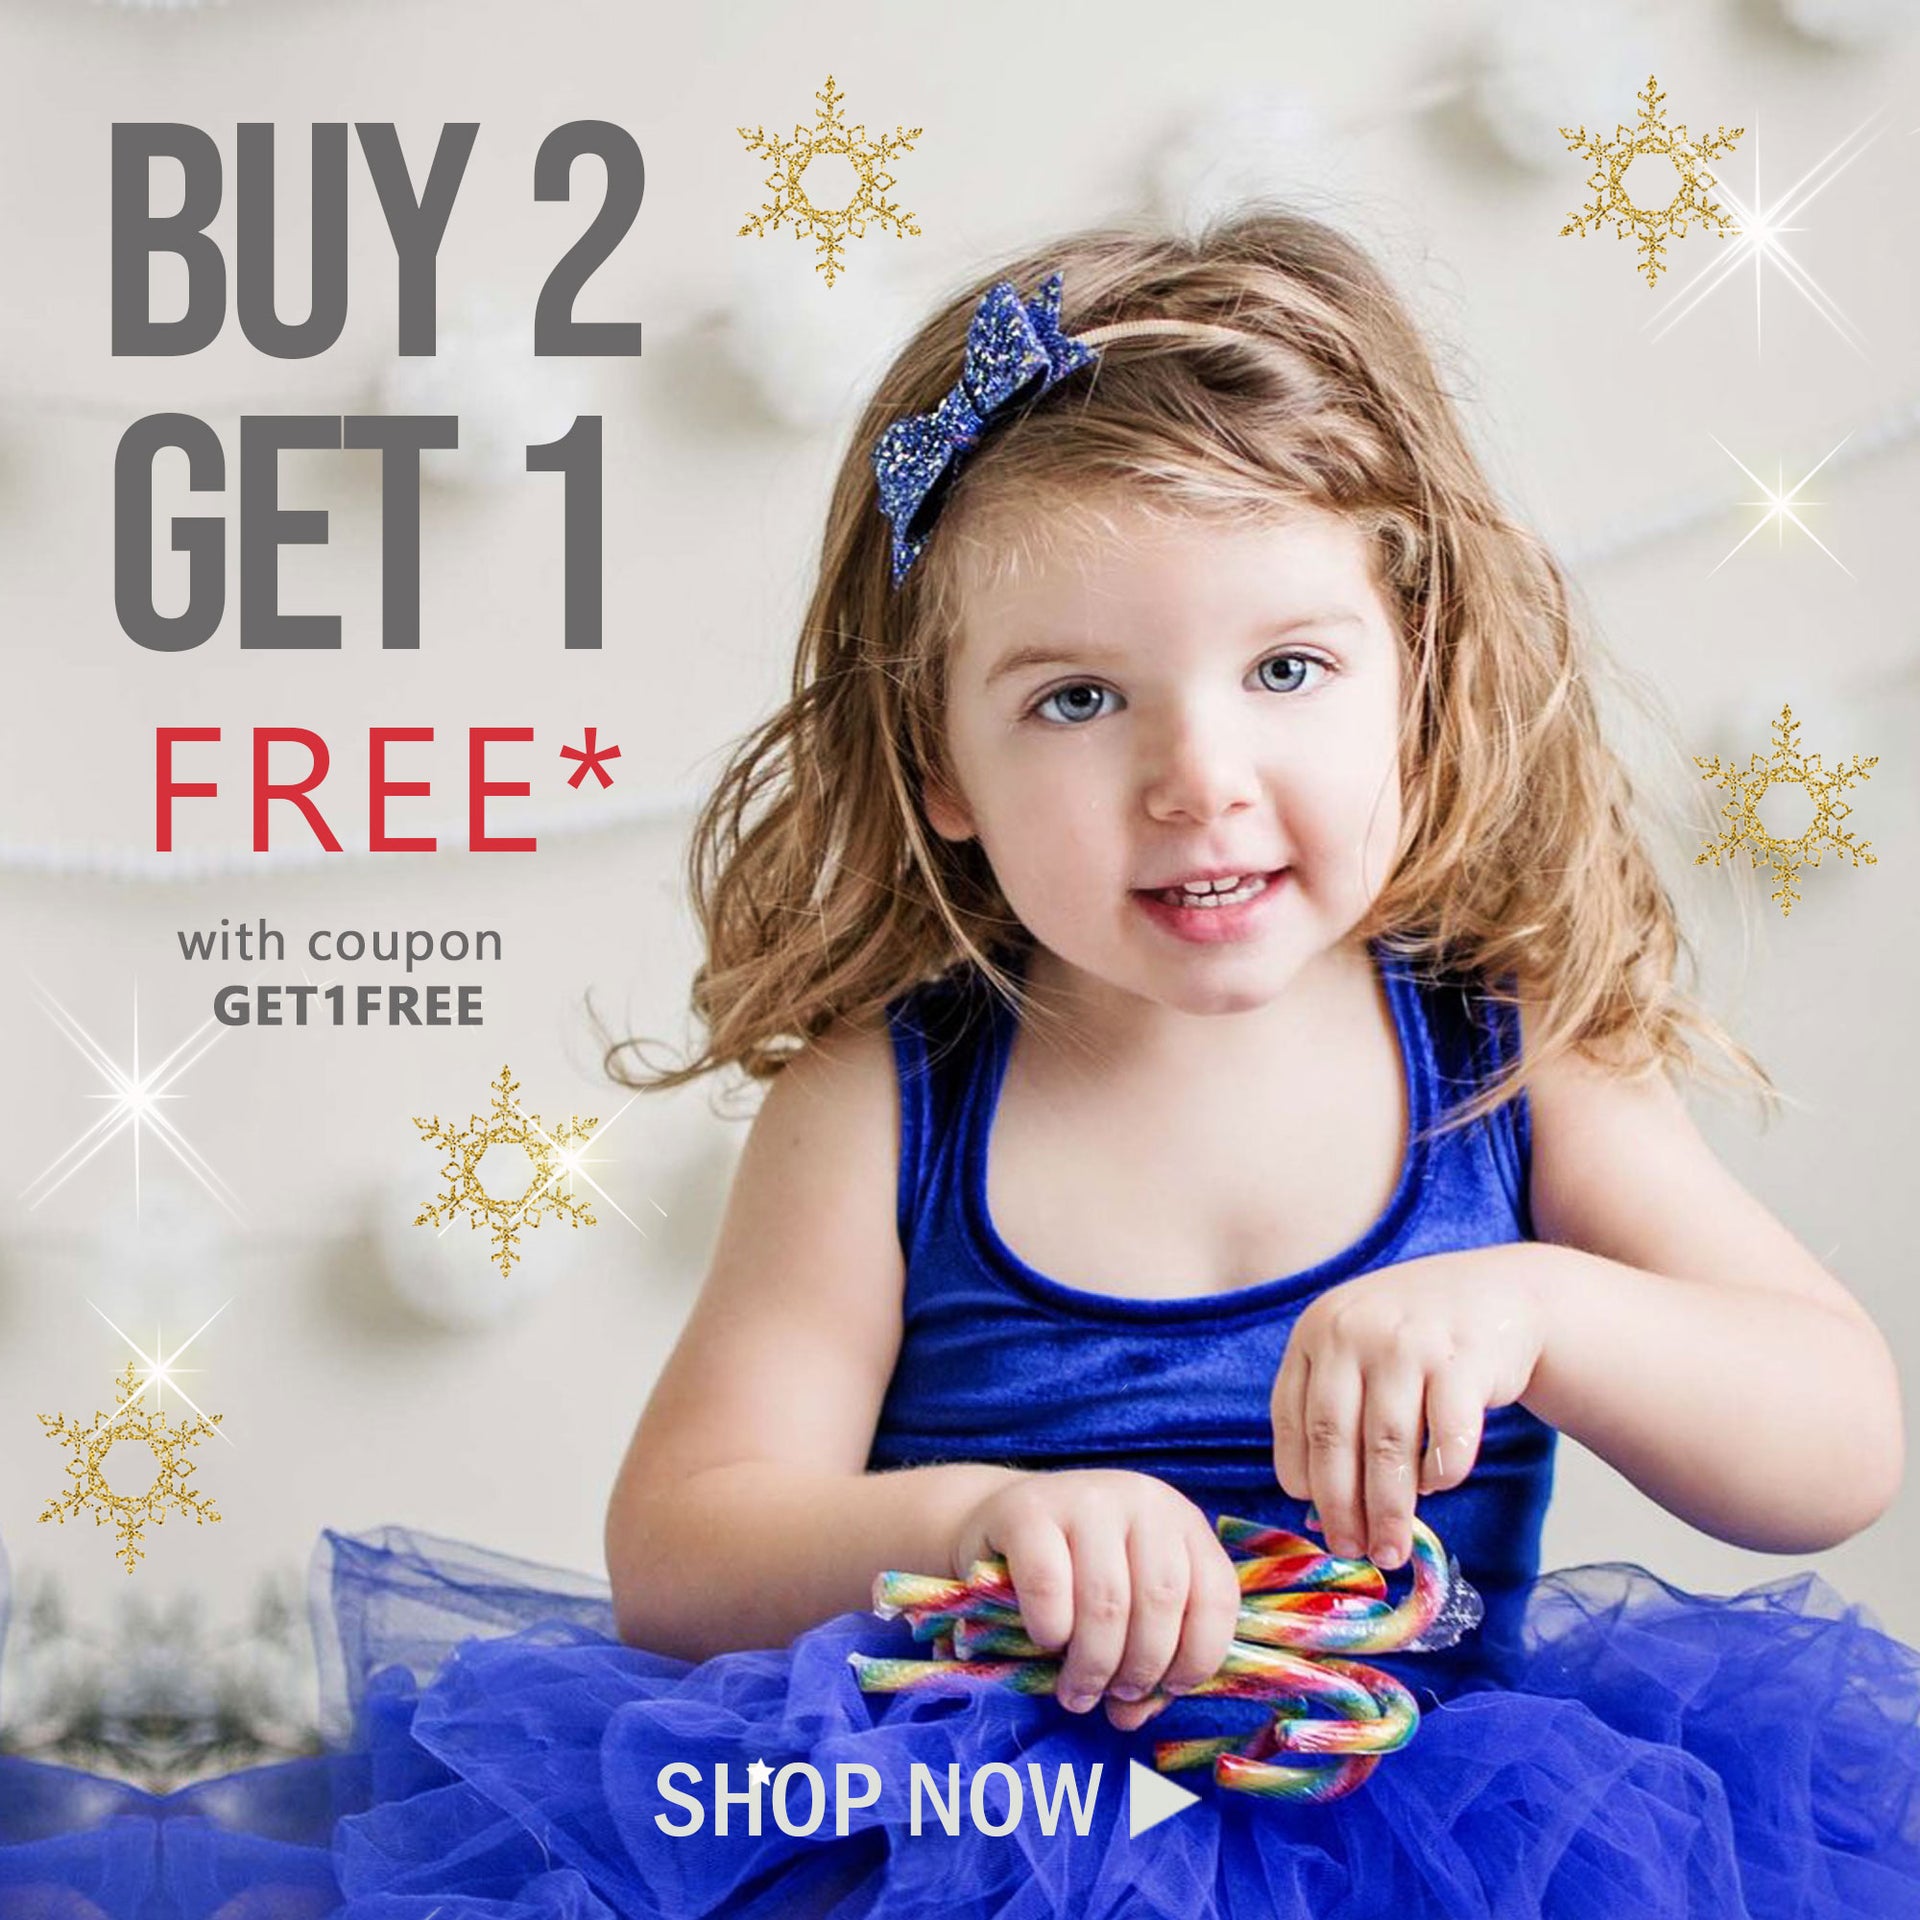 Buy Two Get One FREE* - Happening now!